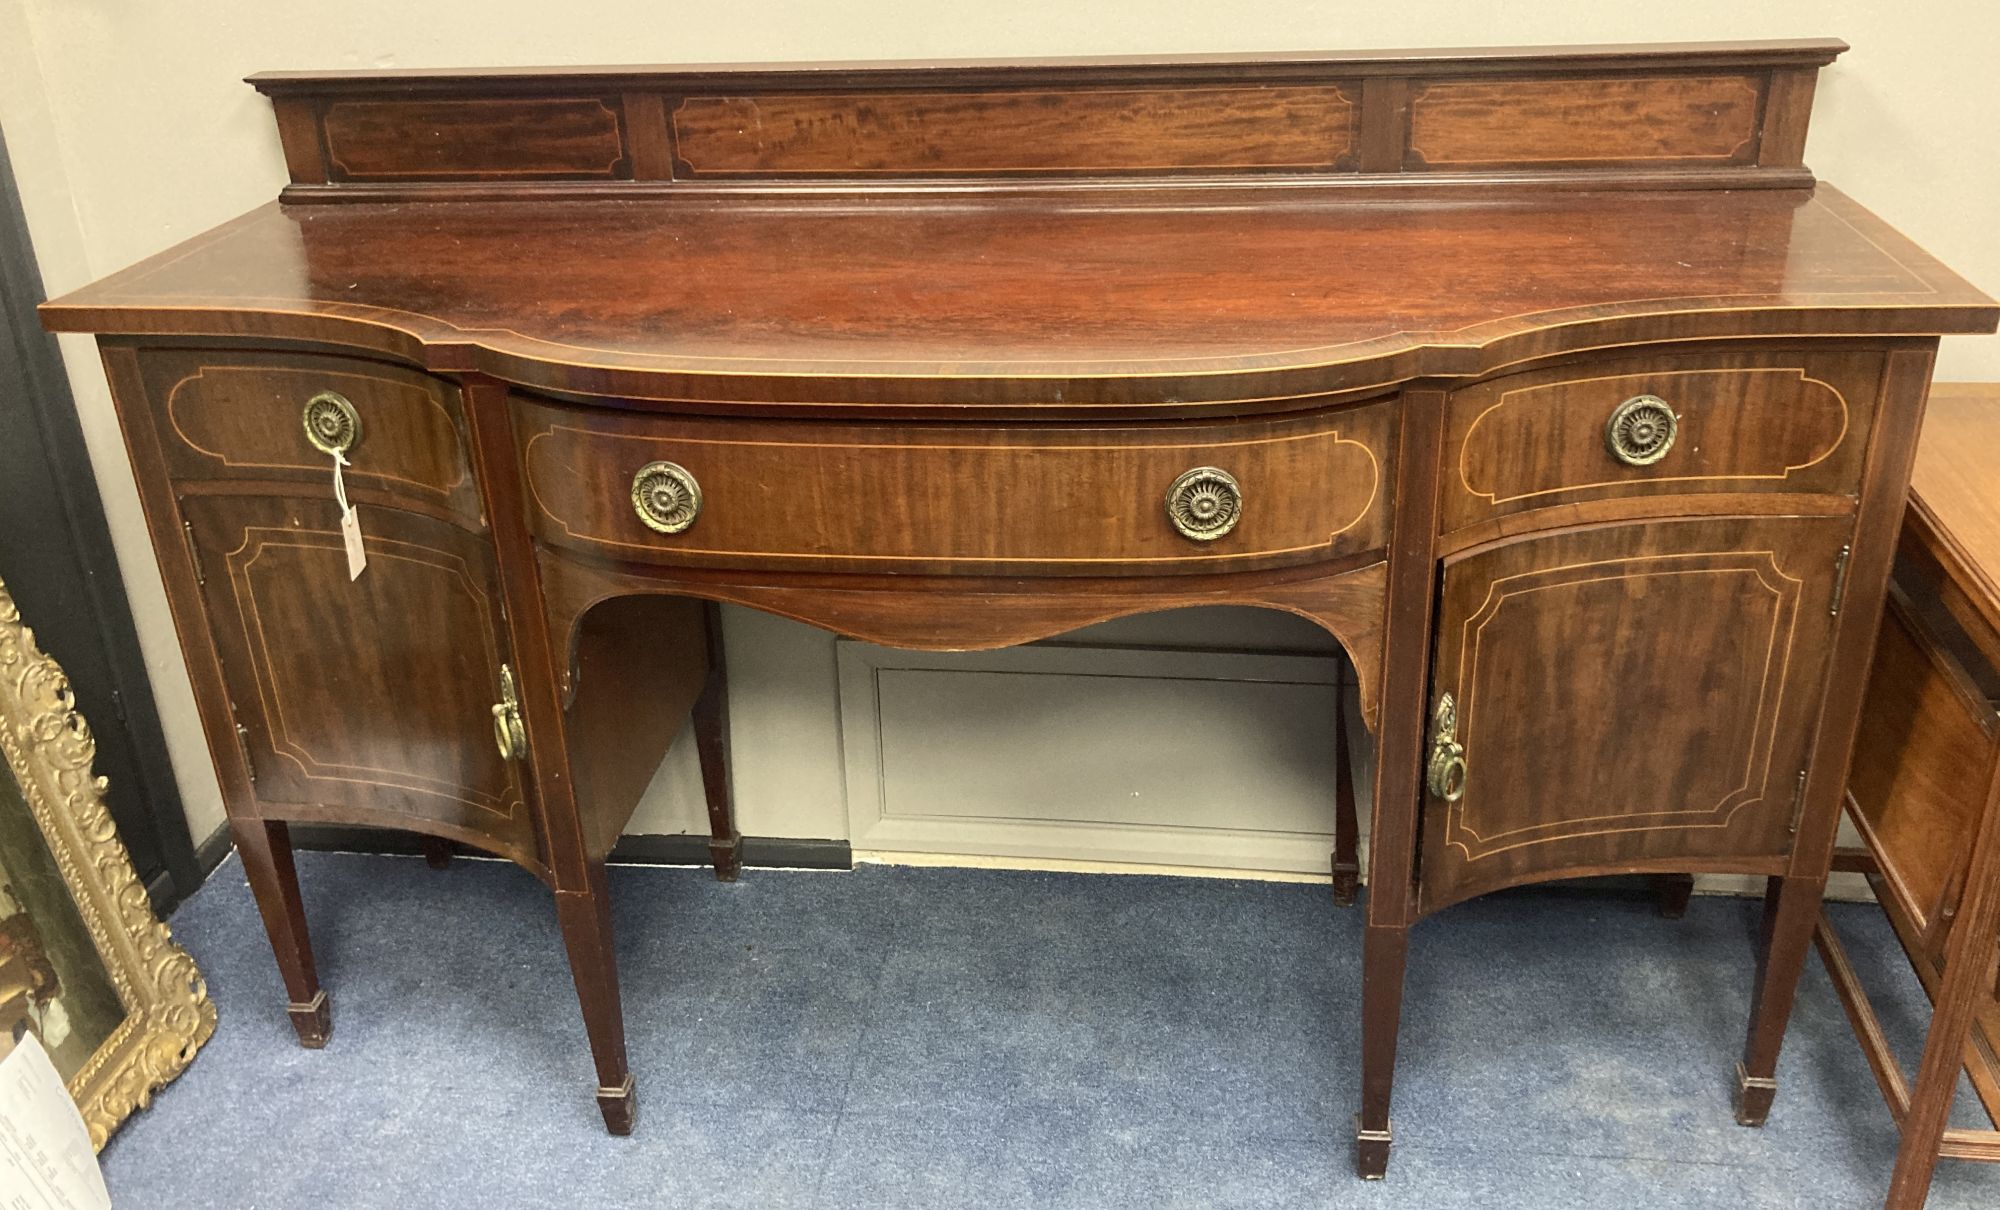 An Edwardian inlaid mahogany serpentine fronted sideboard, length 184cm, depth 68cm, height 112cm